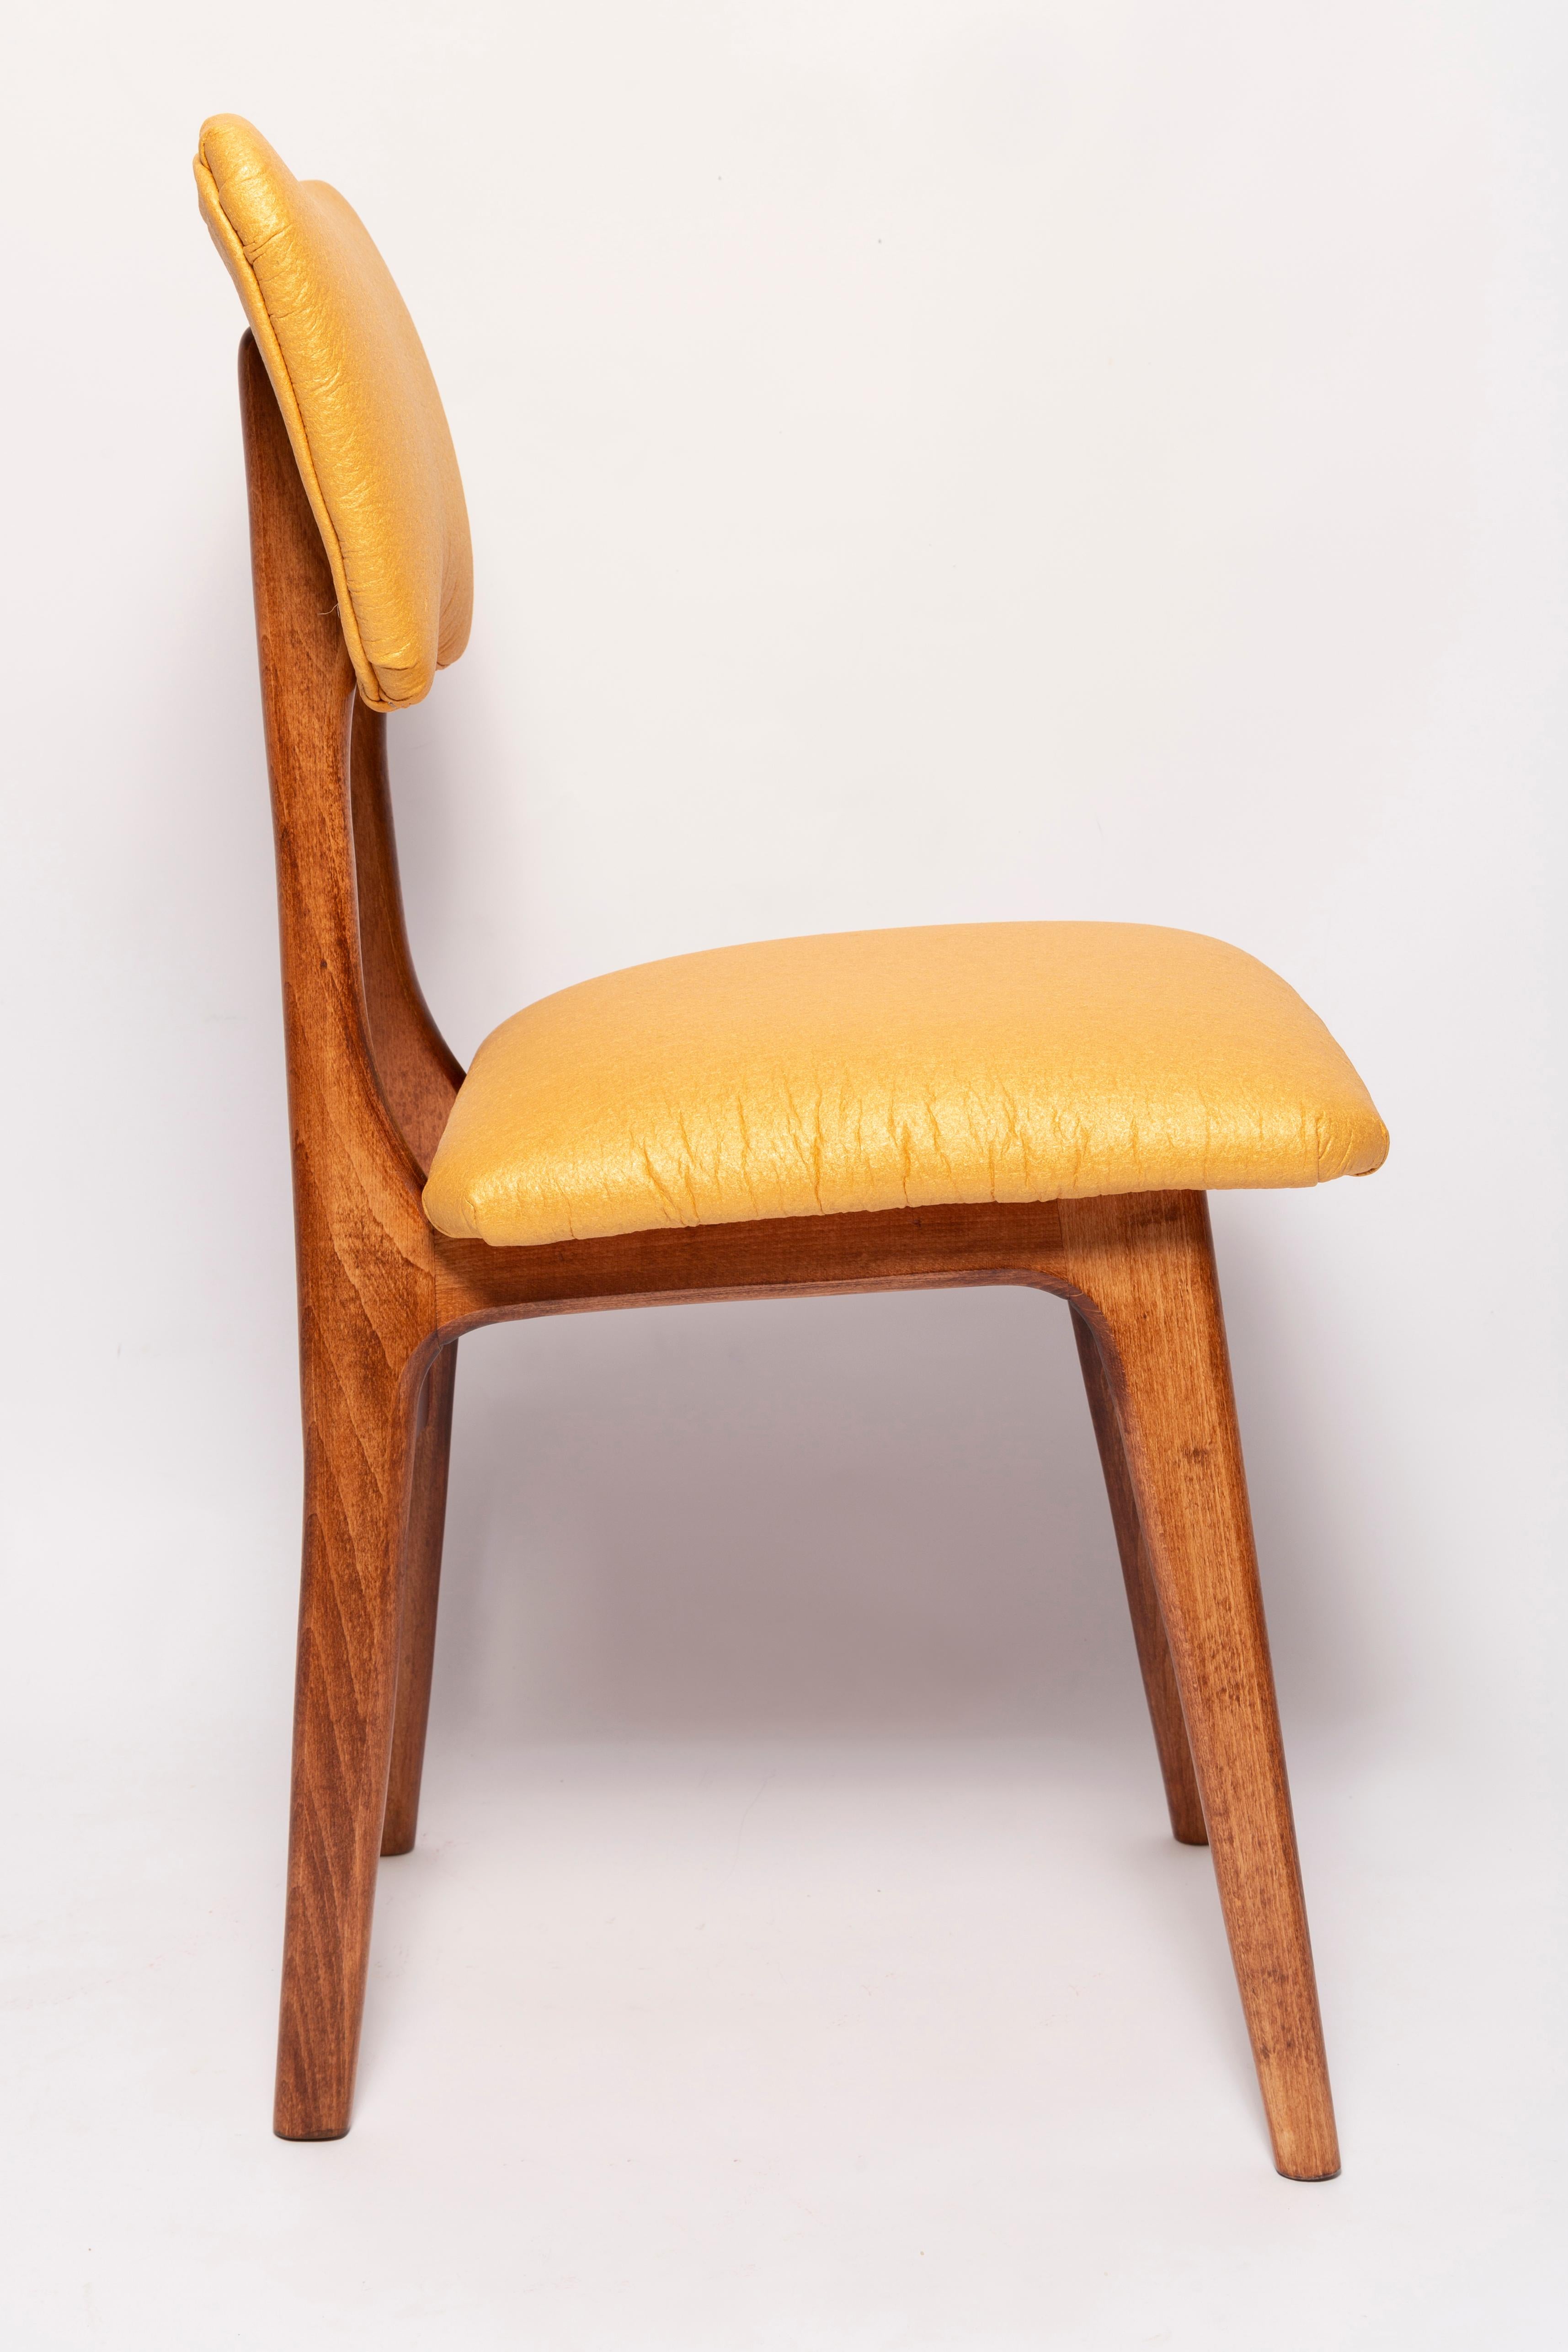 Mid Century Butterfly Dining Chair, Pineapple Vegan Leather, Europe, 1960s For Sale 2